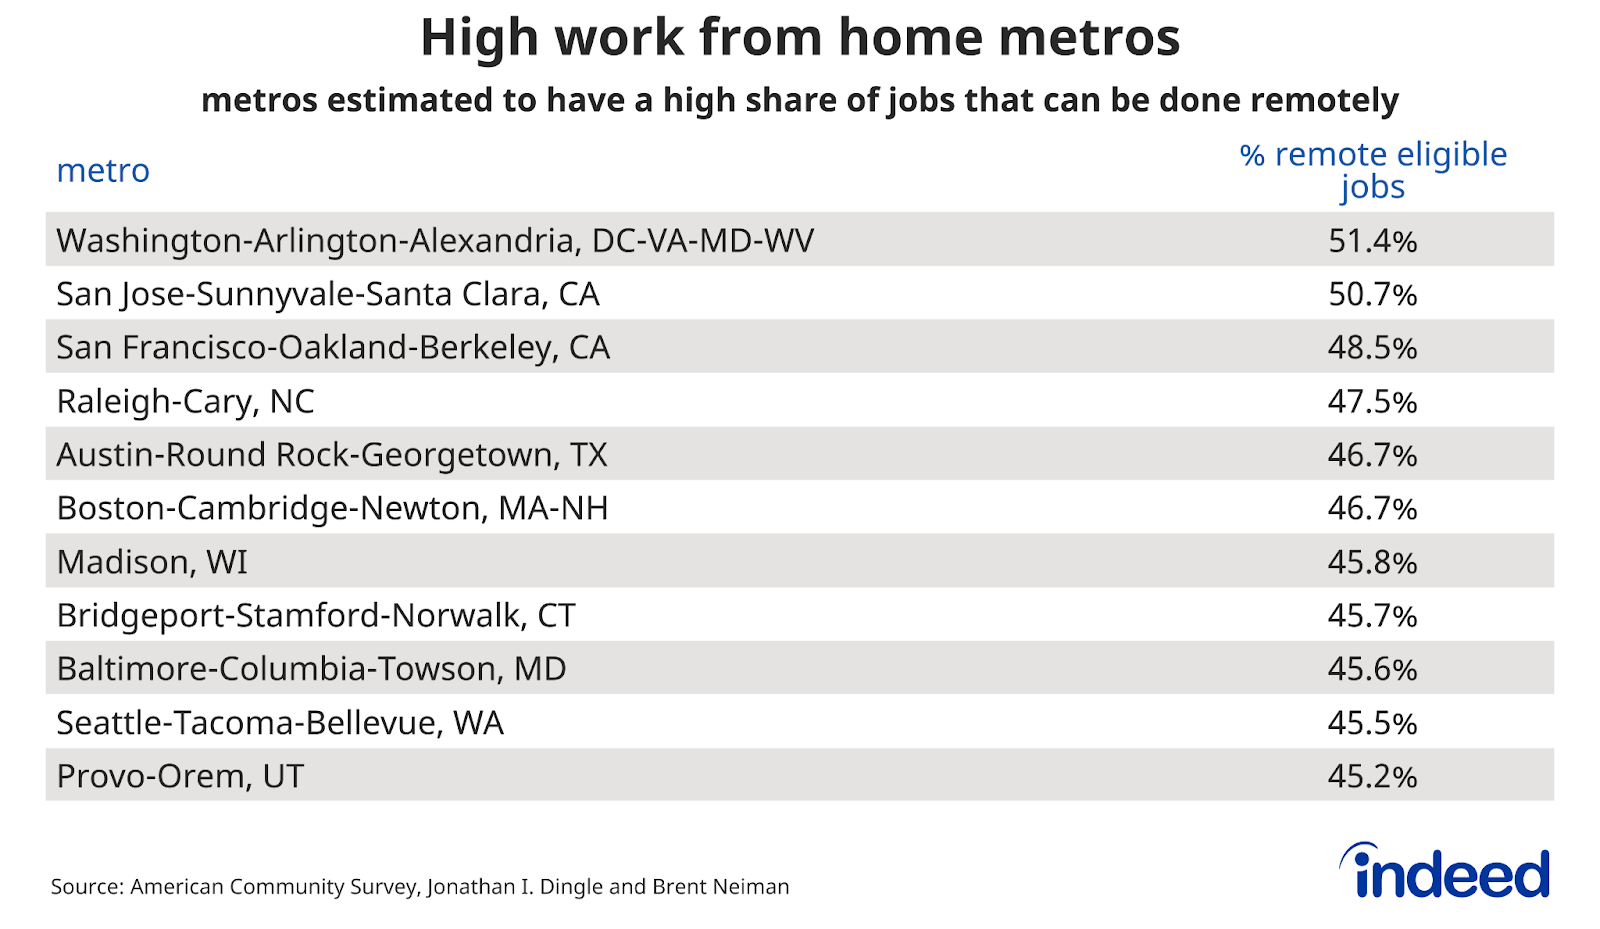 Chart titled “High work from home metros” with columns named “ metro” and “% remote eligible jobs” lists the metros that are estimated to have a large share of jobs that can be done remotely. 